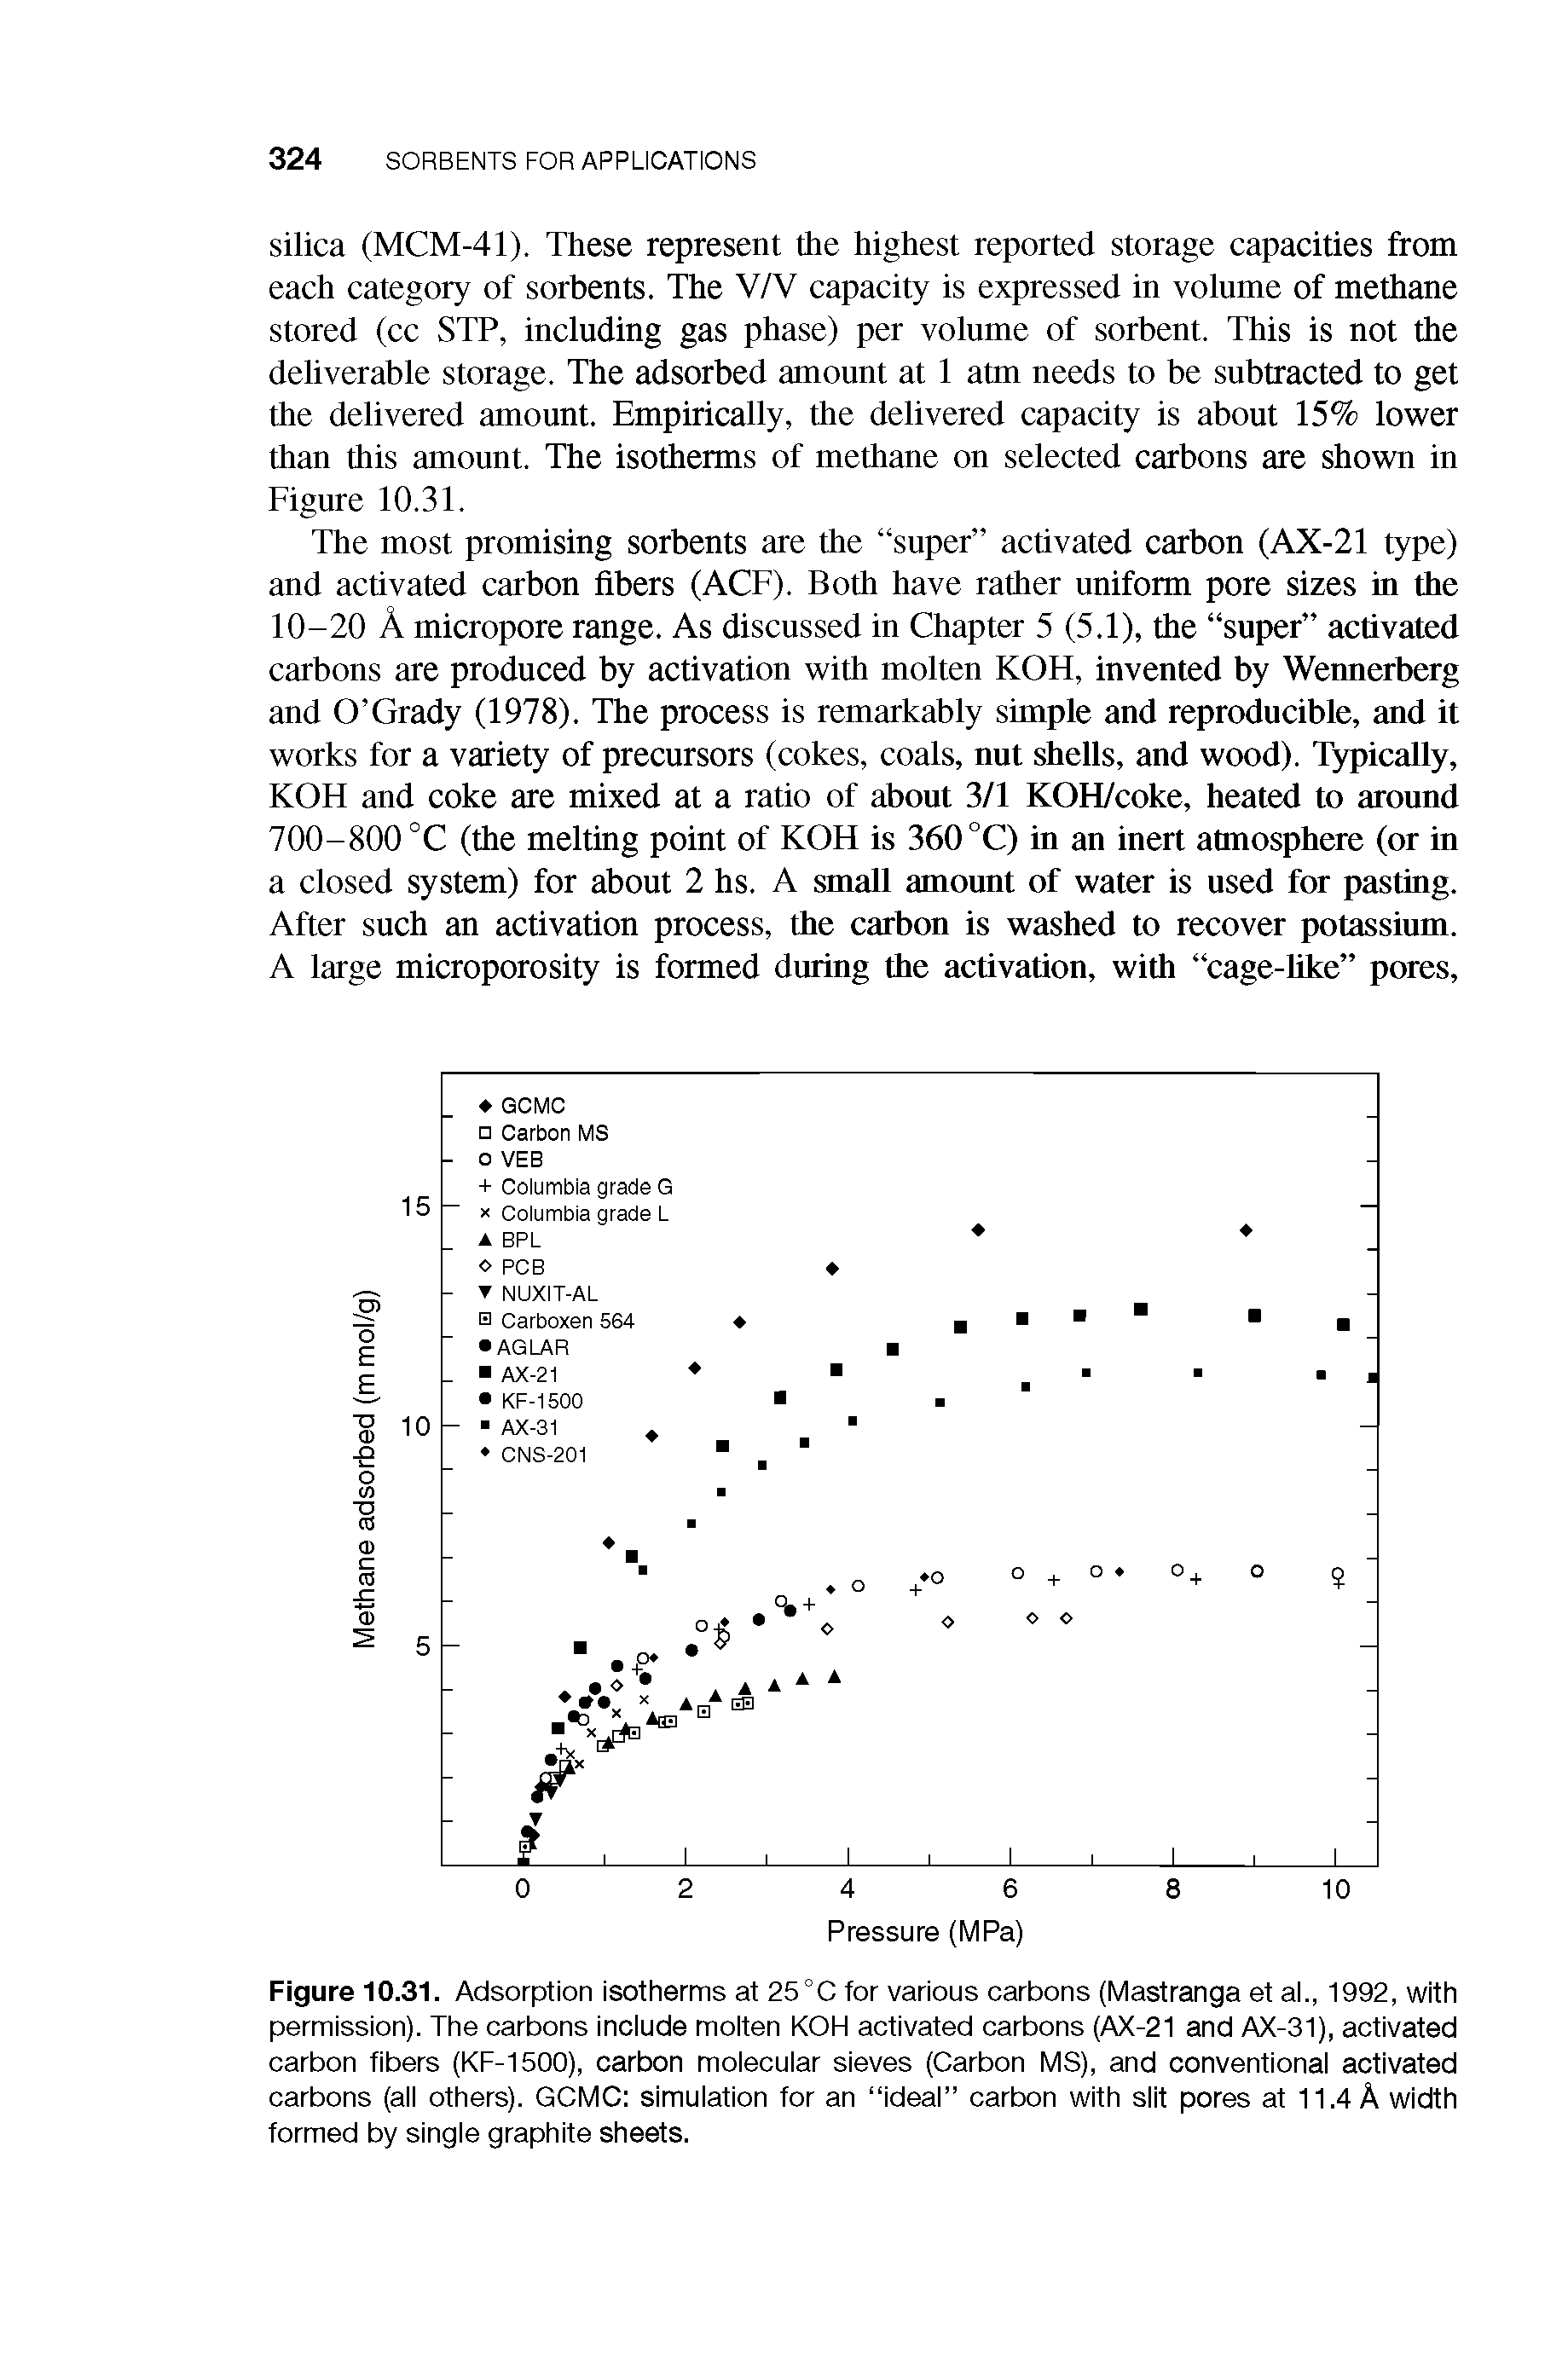 Figure 10.31. Adsorption isotherms at 25°C for various carbons (Mastranga et ai., 1992, with permission). The carbons inciude moiten KOH activated carbons (AX-21 and AX-31), activated carbon fibers (KF-1500), carbon moiecuiar sieves (Carbon MS), and conventionai activated carbons (aii others). GCMC simuiation for an ideai carbon with siit pores at 11.4 A width formed by singie graphite sheets.